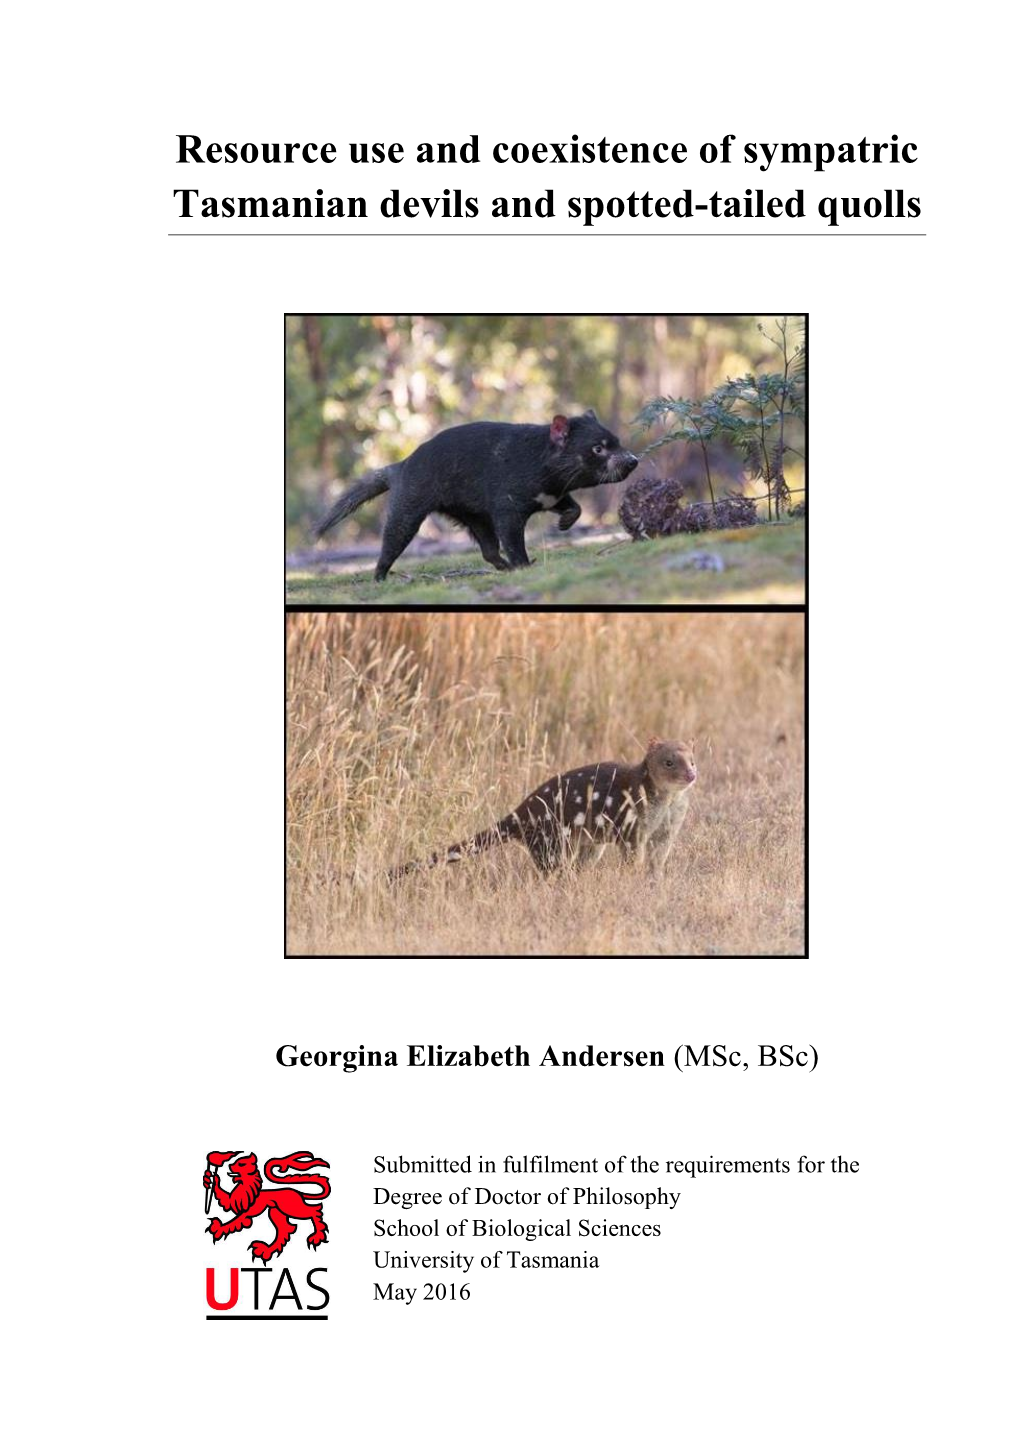 Resource Use and Coexistence of Sympatric Tasmanian Devils and Spotted-Tailed Quolls